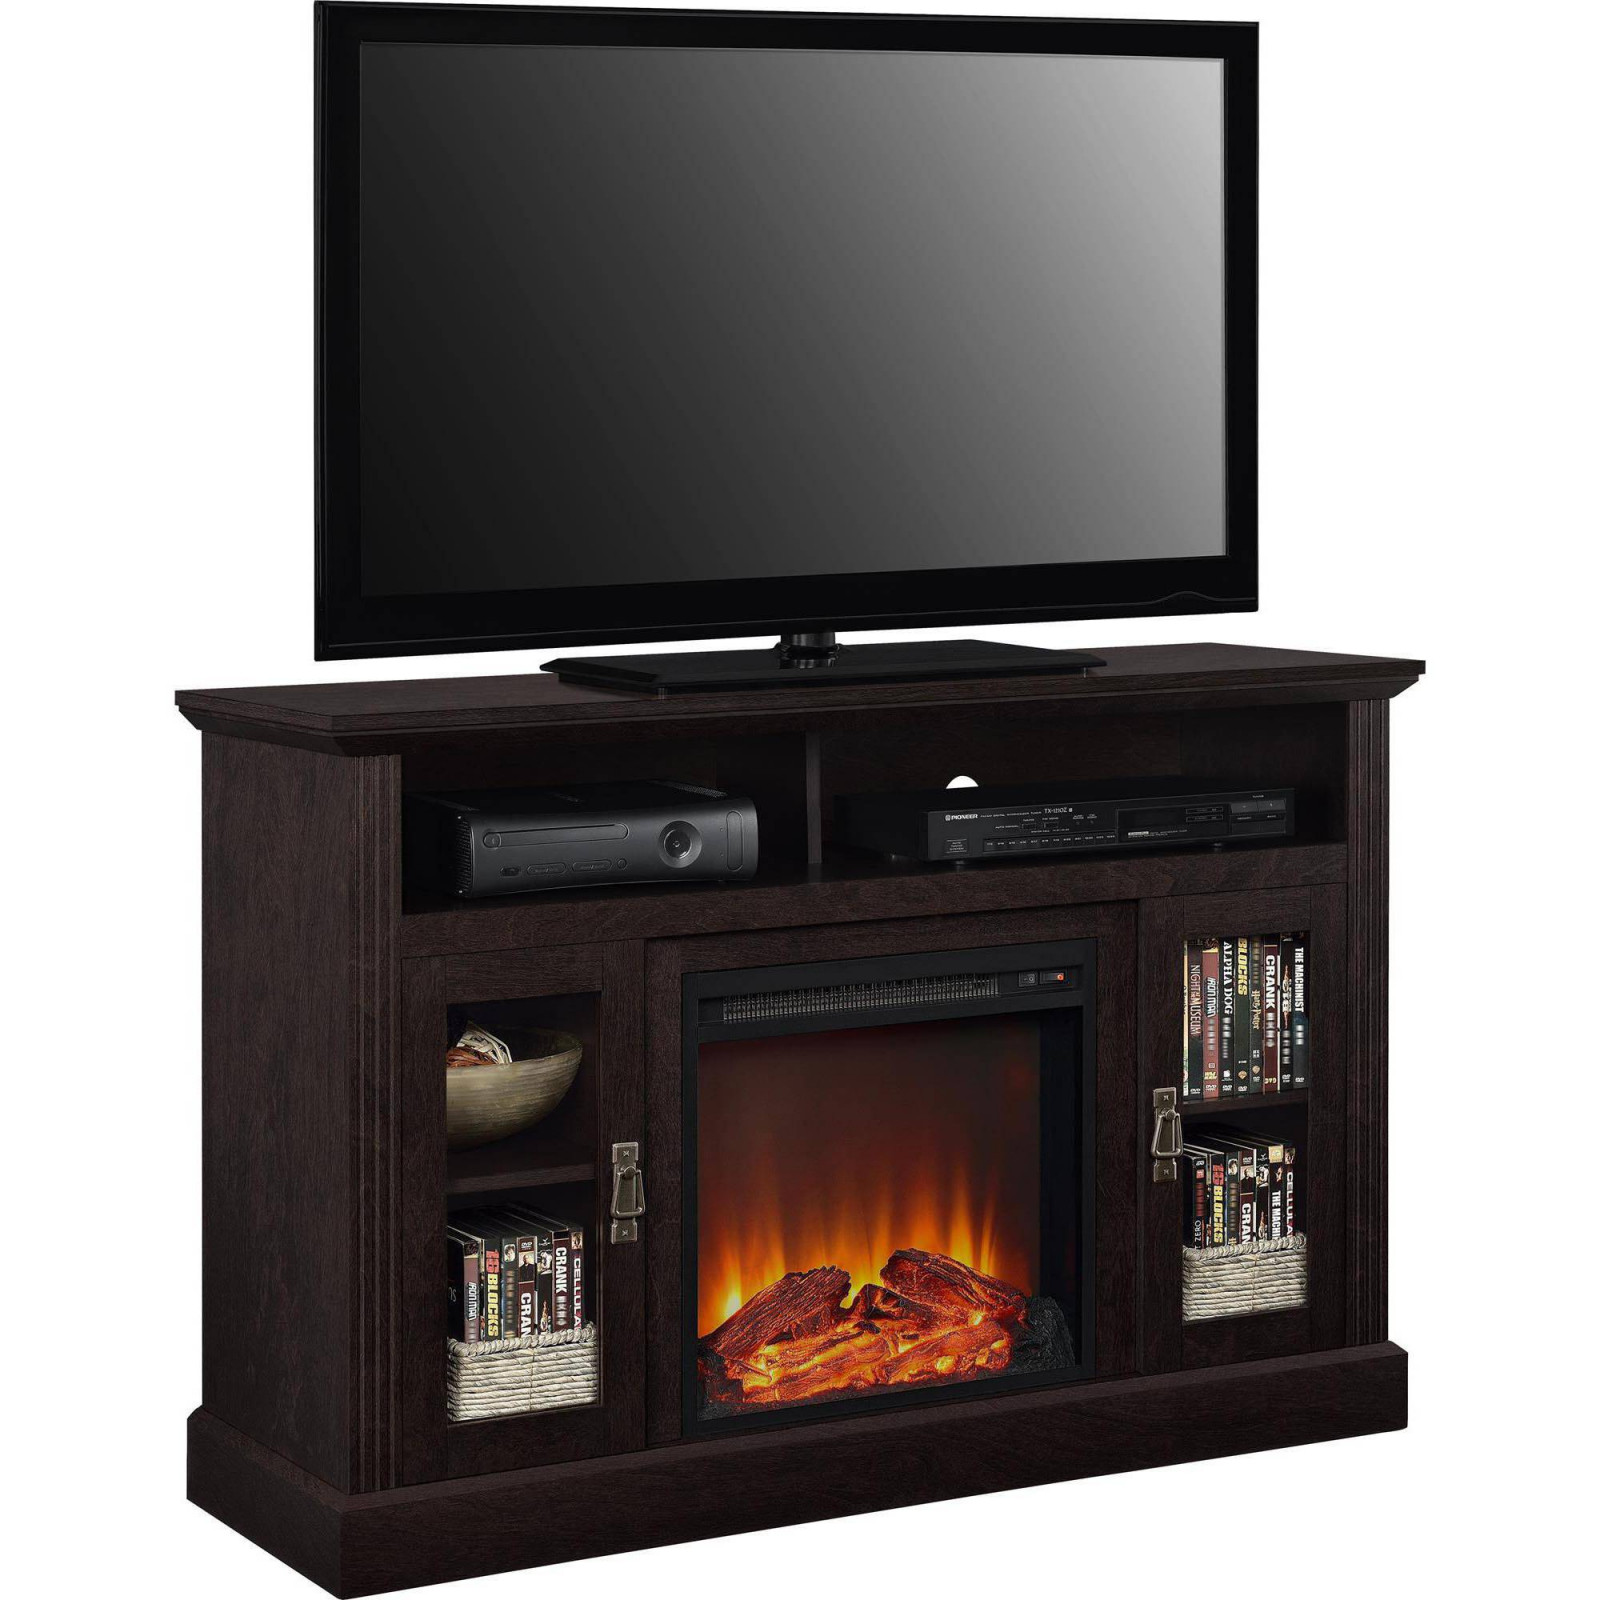 50 Inch Fireplace Tv Stand Inspirational 35 Minimaliste Electric Fireplace Tv Stand